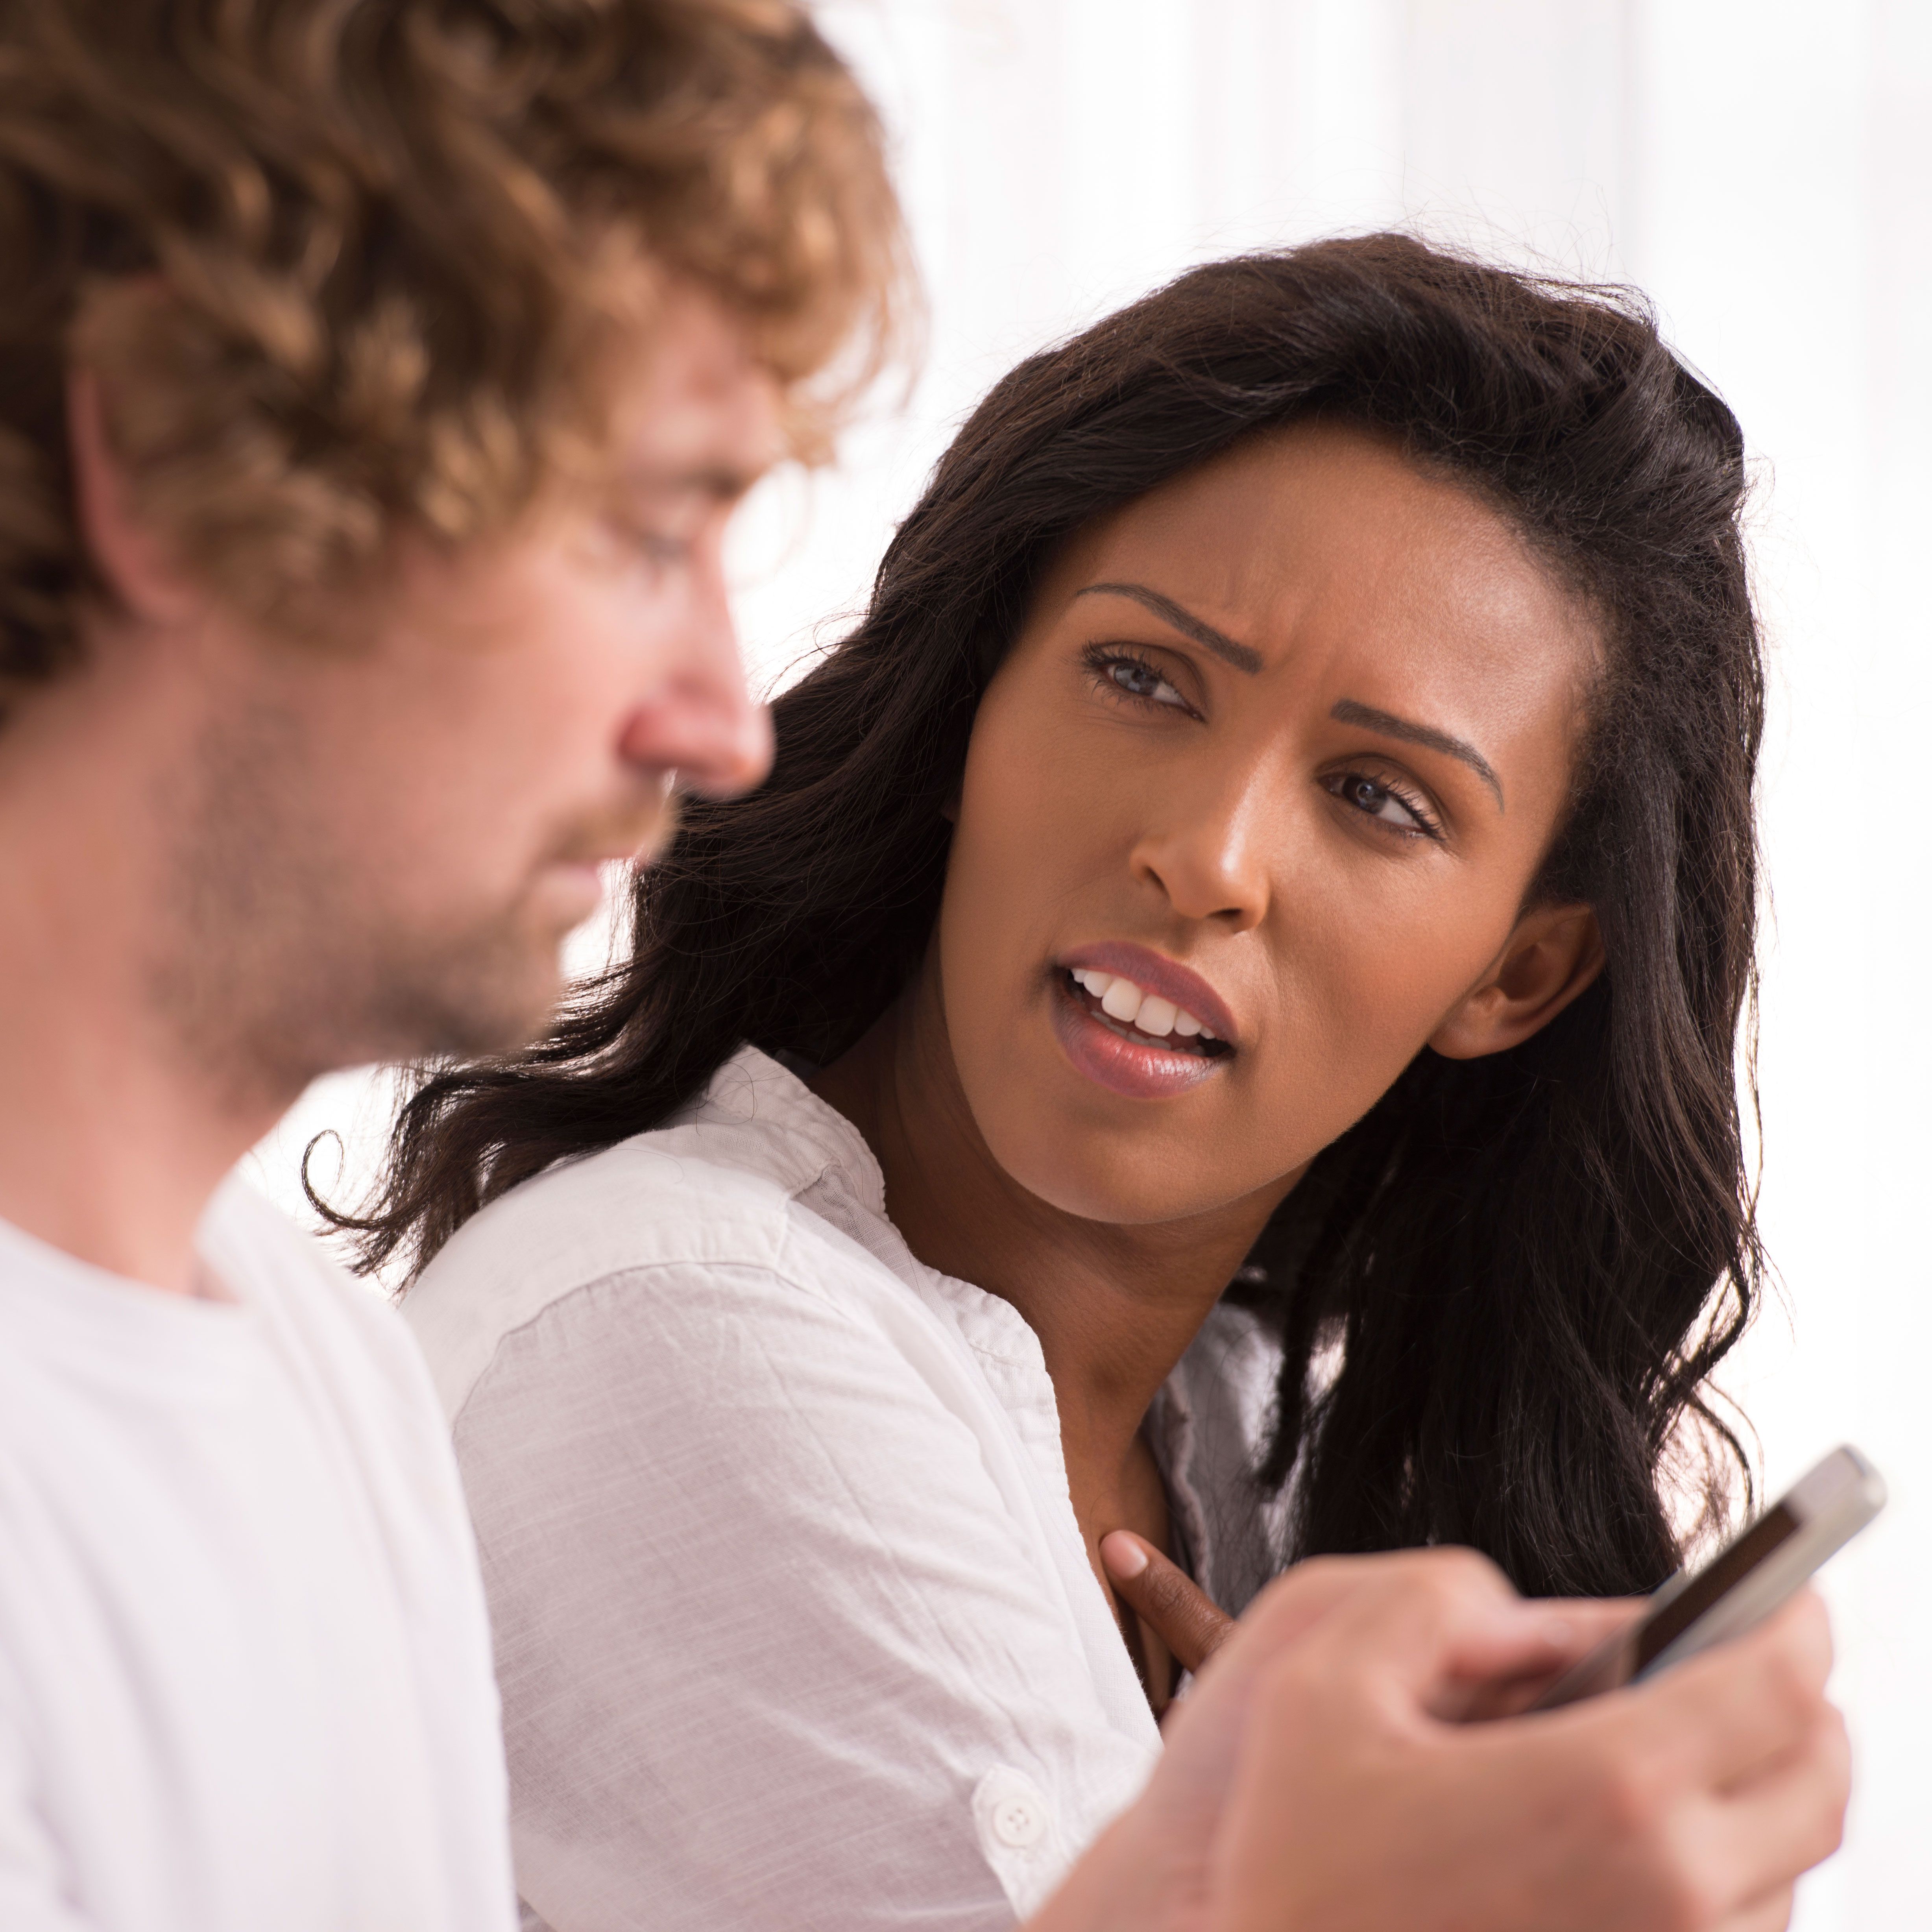 10 signs you are dating the wrong person